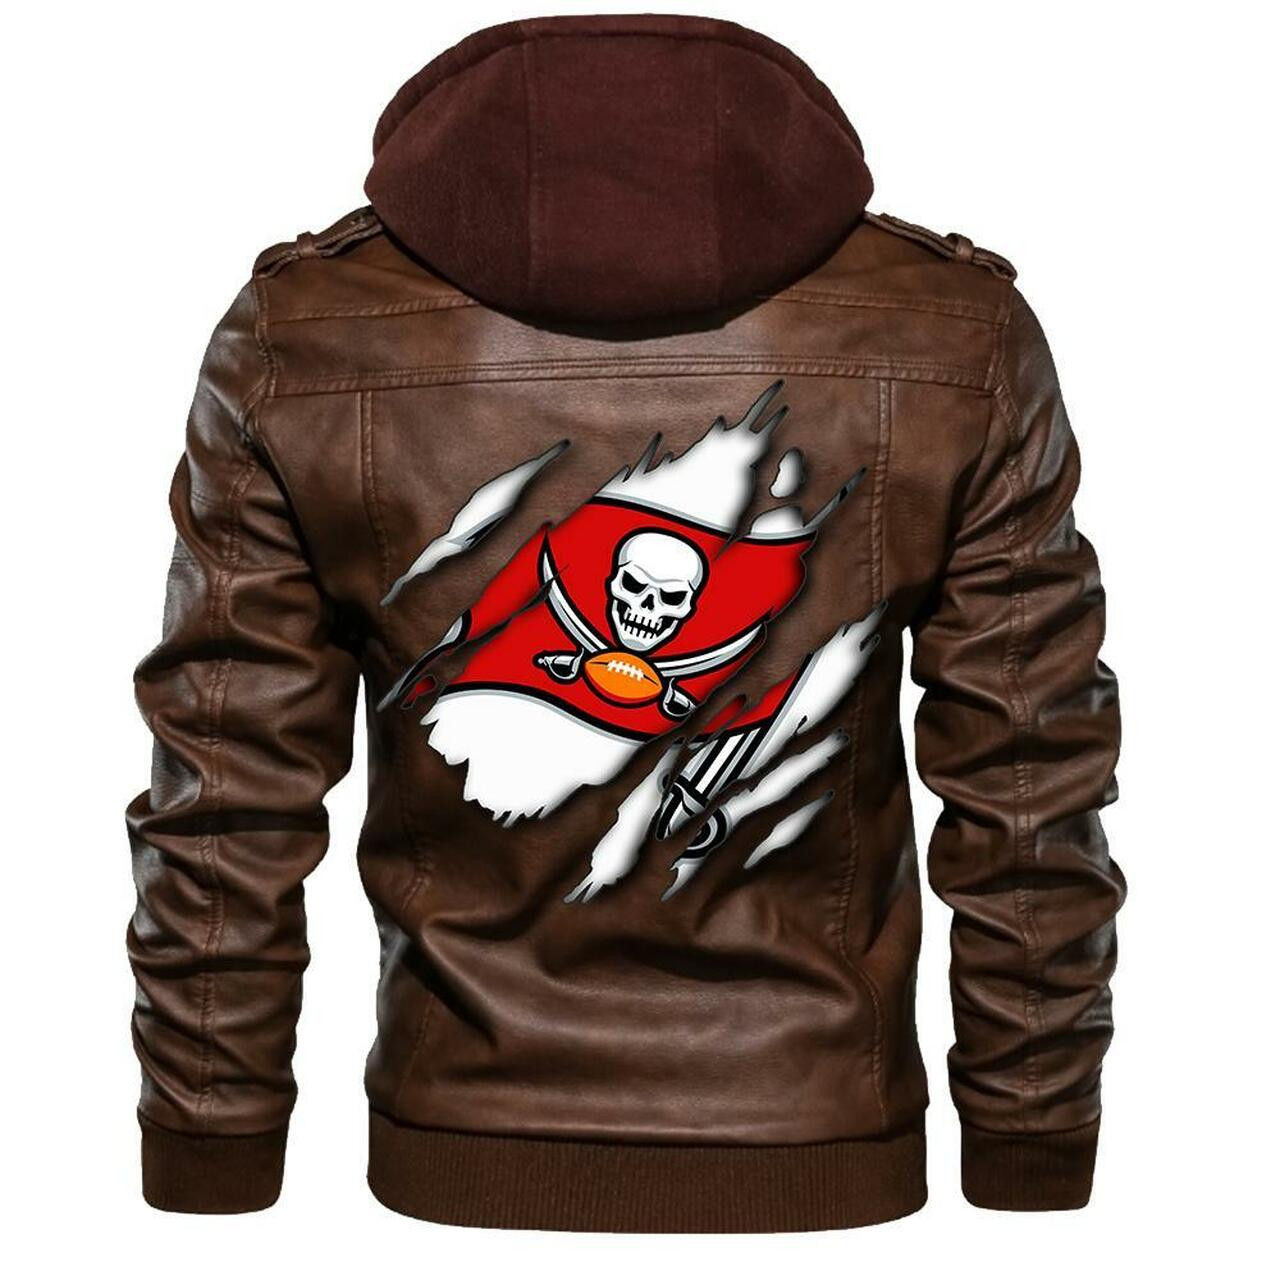 Check out and find the right leather jacket below 337